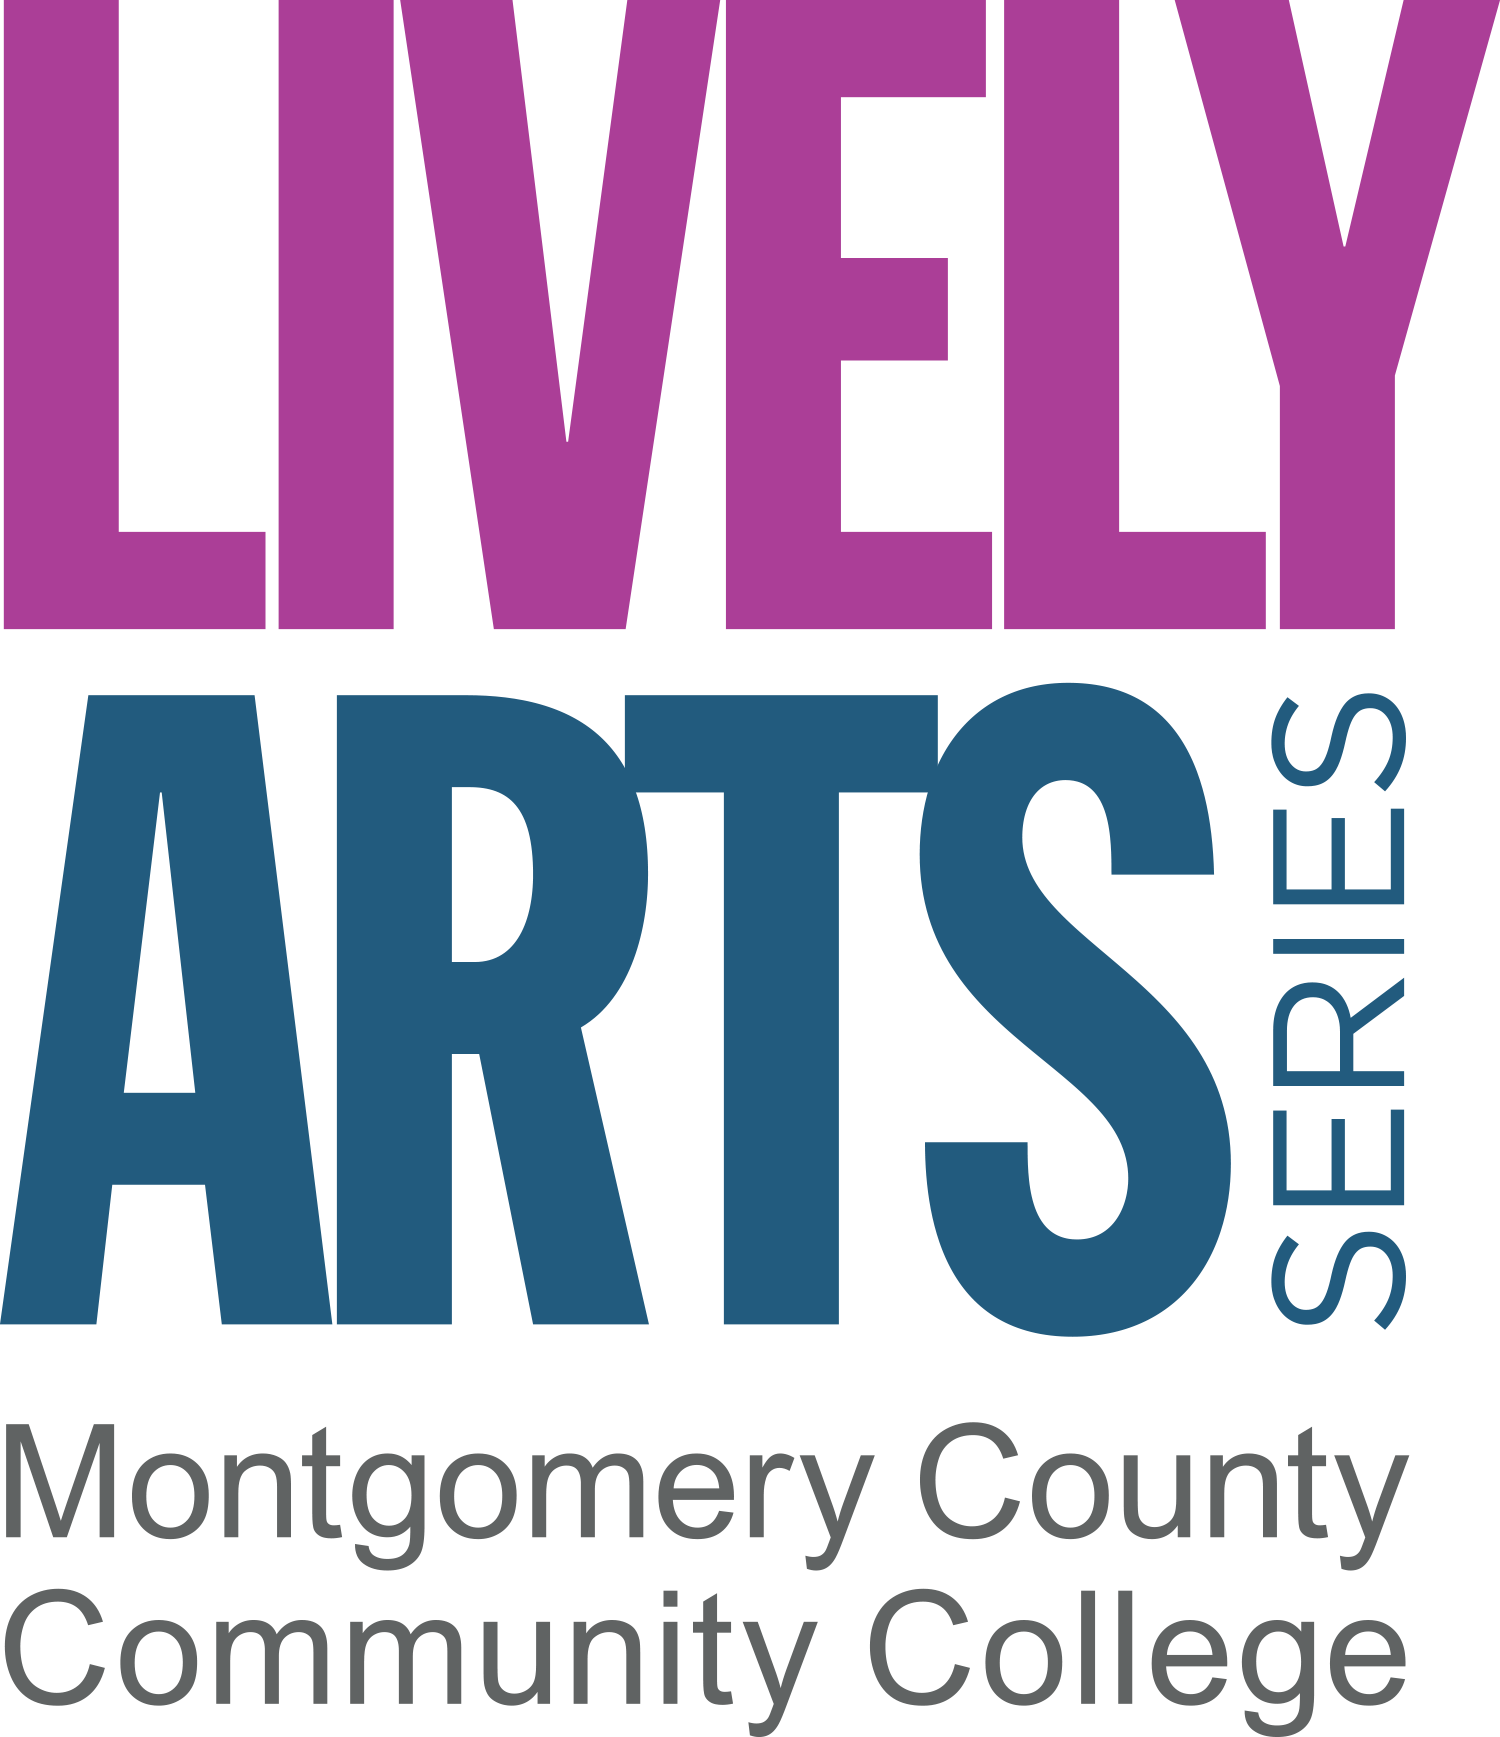 Lively Arts Series, Montgomery County Community College